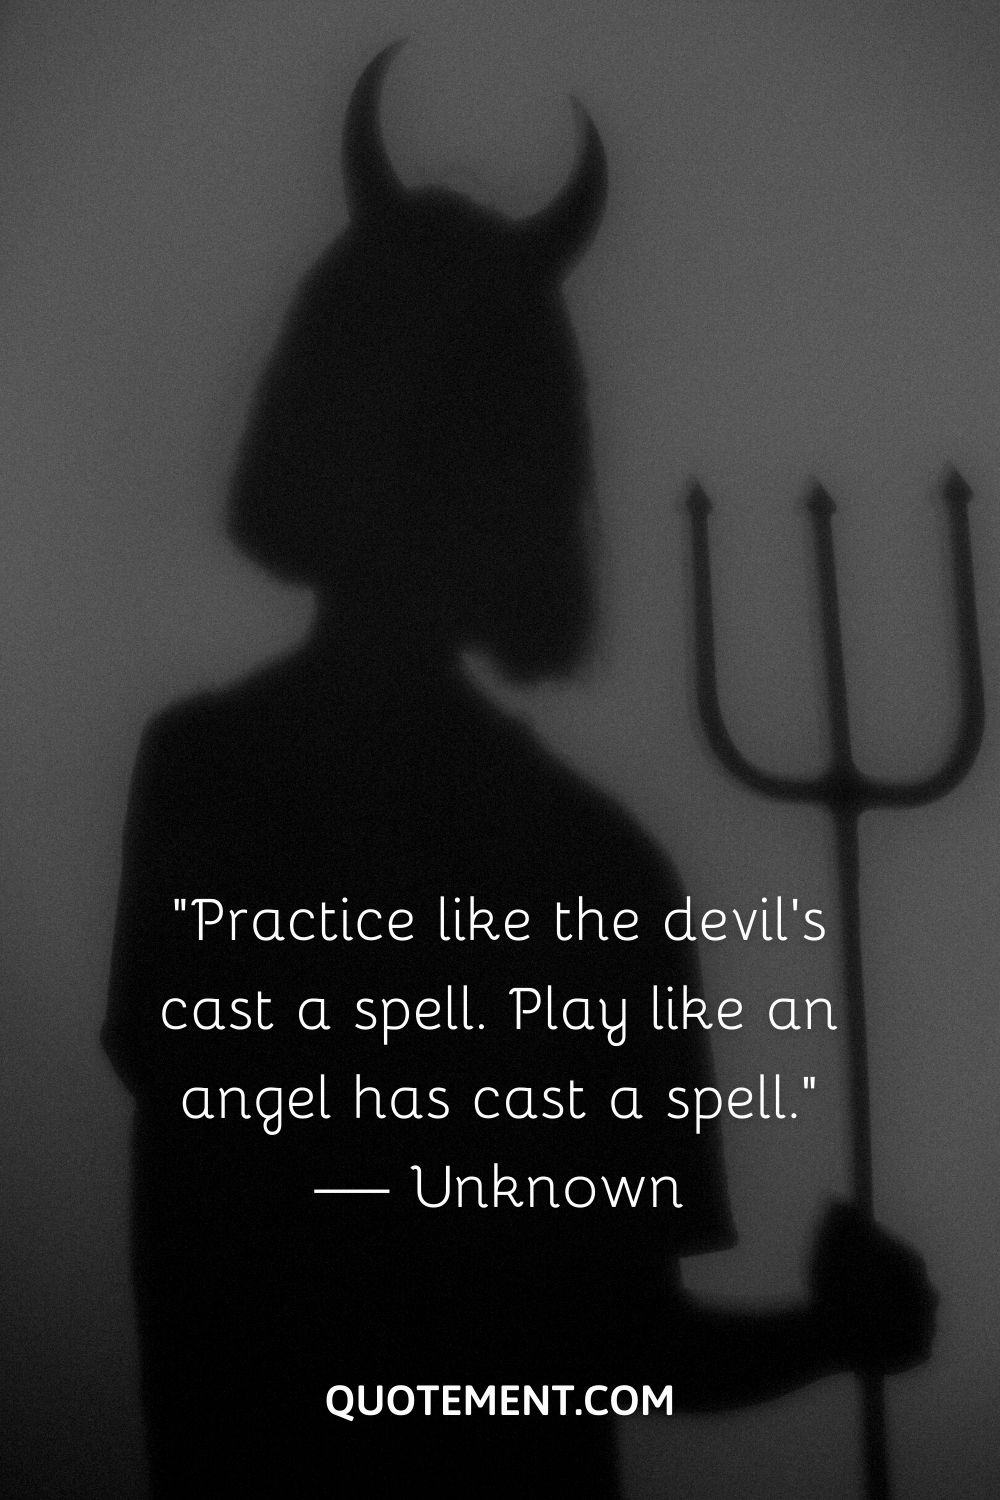 “Practice like the devil’s cast a spell. Play like an angel has cast a spell.” — Unknown